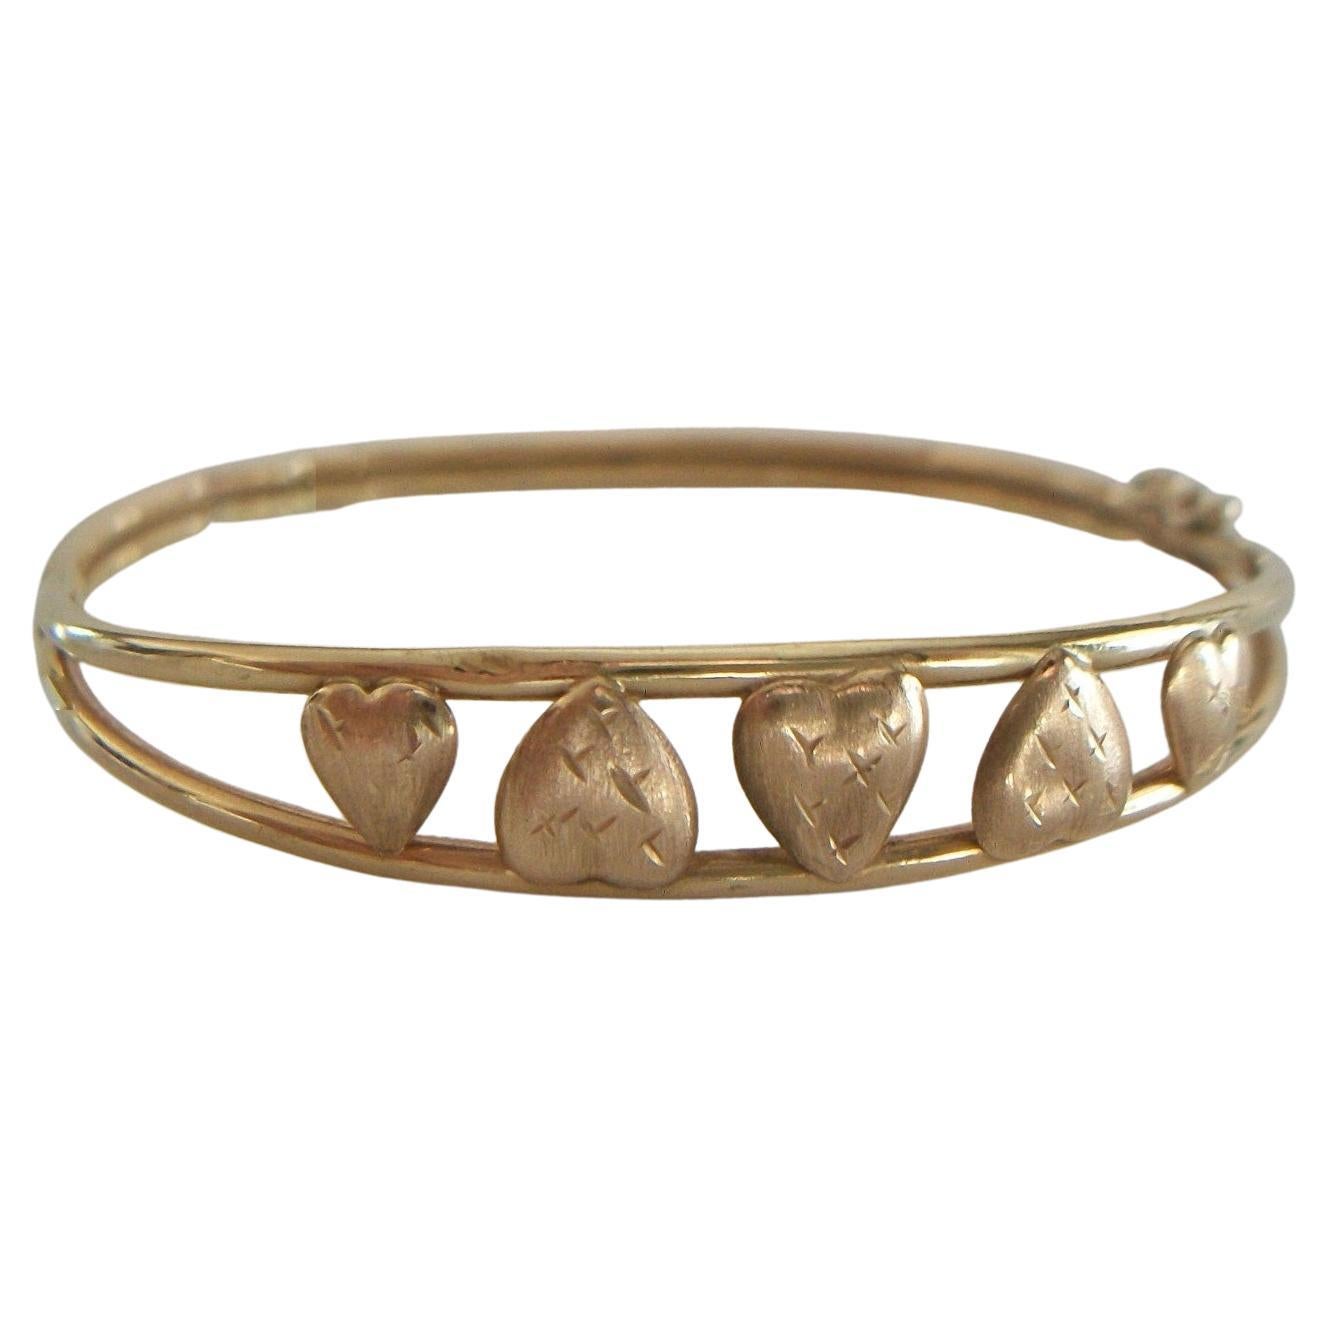 Vintage 10K Yellow Gold Bangle Bracelet with Hearts - Signed - U.S. - C. 1980's For Sale